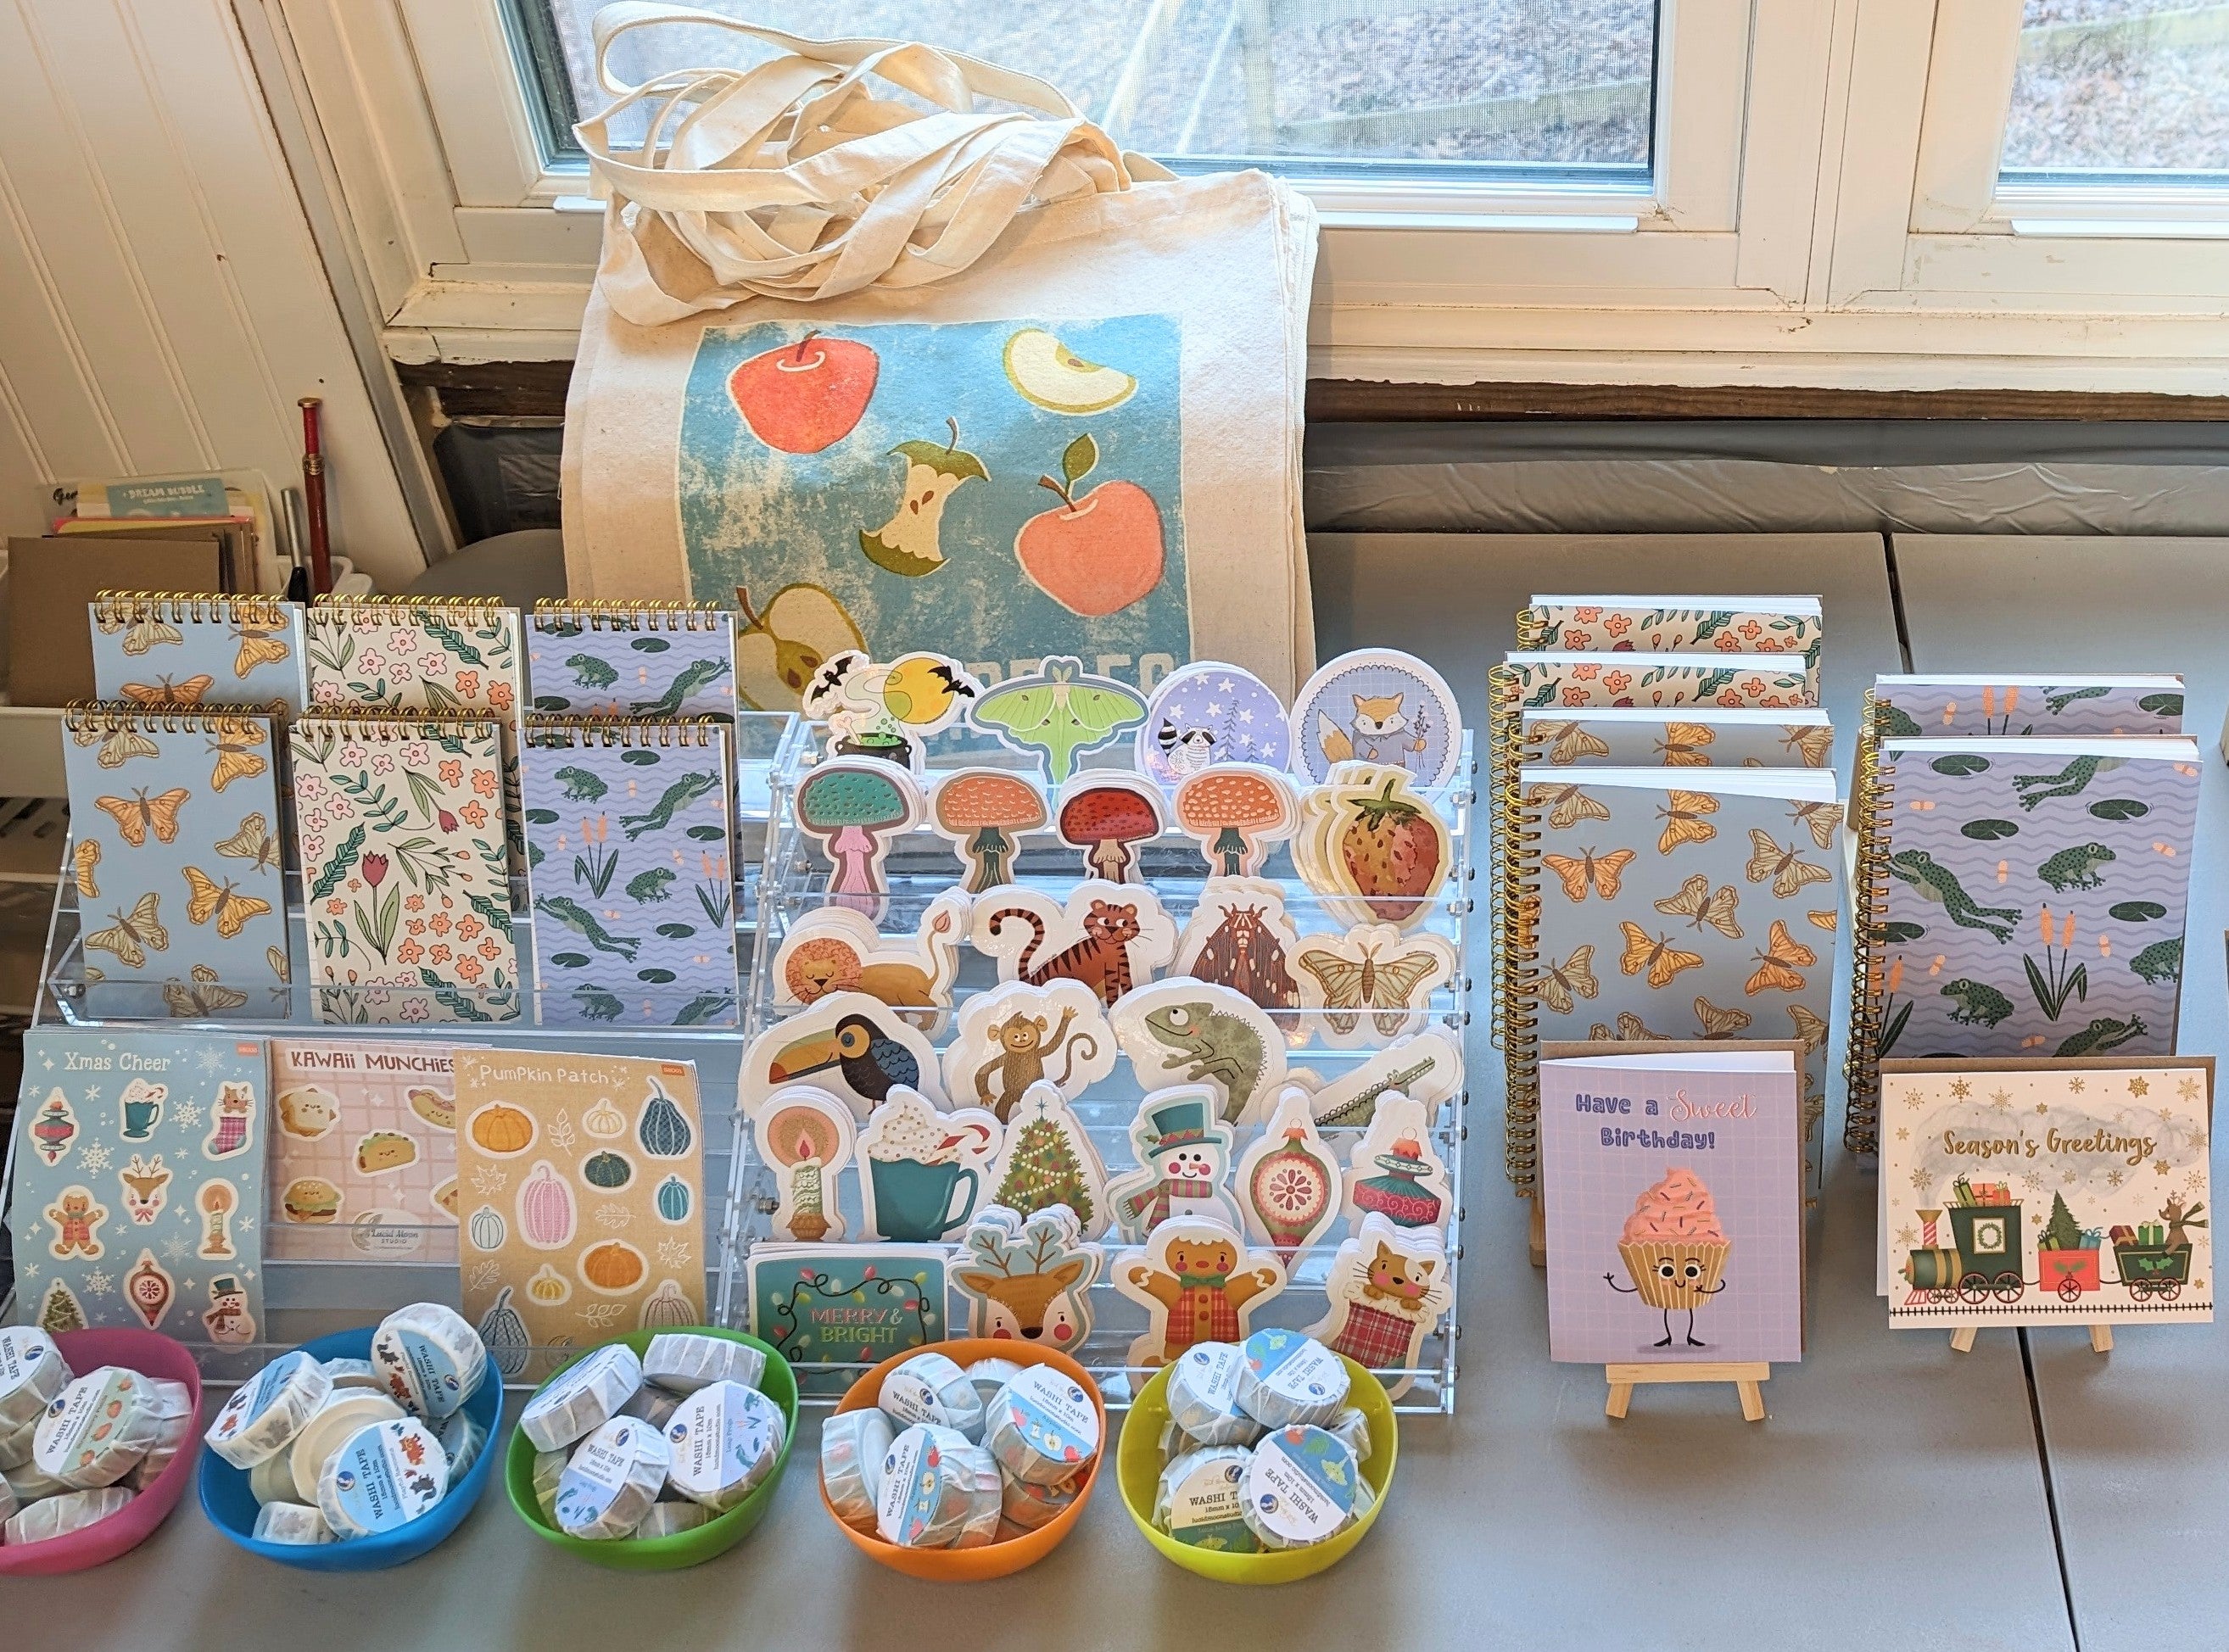 A photo of Lucid Moon Studio's sustainably made small batch products on a table that include sticker sheets, vinyl stickers, eco-friendly spiral-bound notebooks and jotters, washi tape, greeting cards, and tote bags all featuring designs by artist Lisa Petrillo..